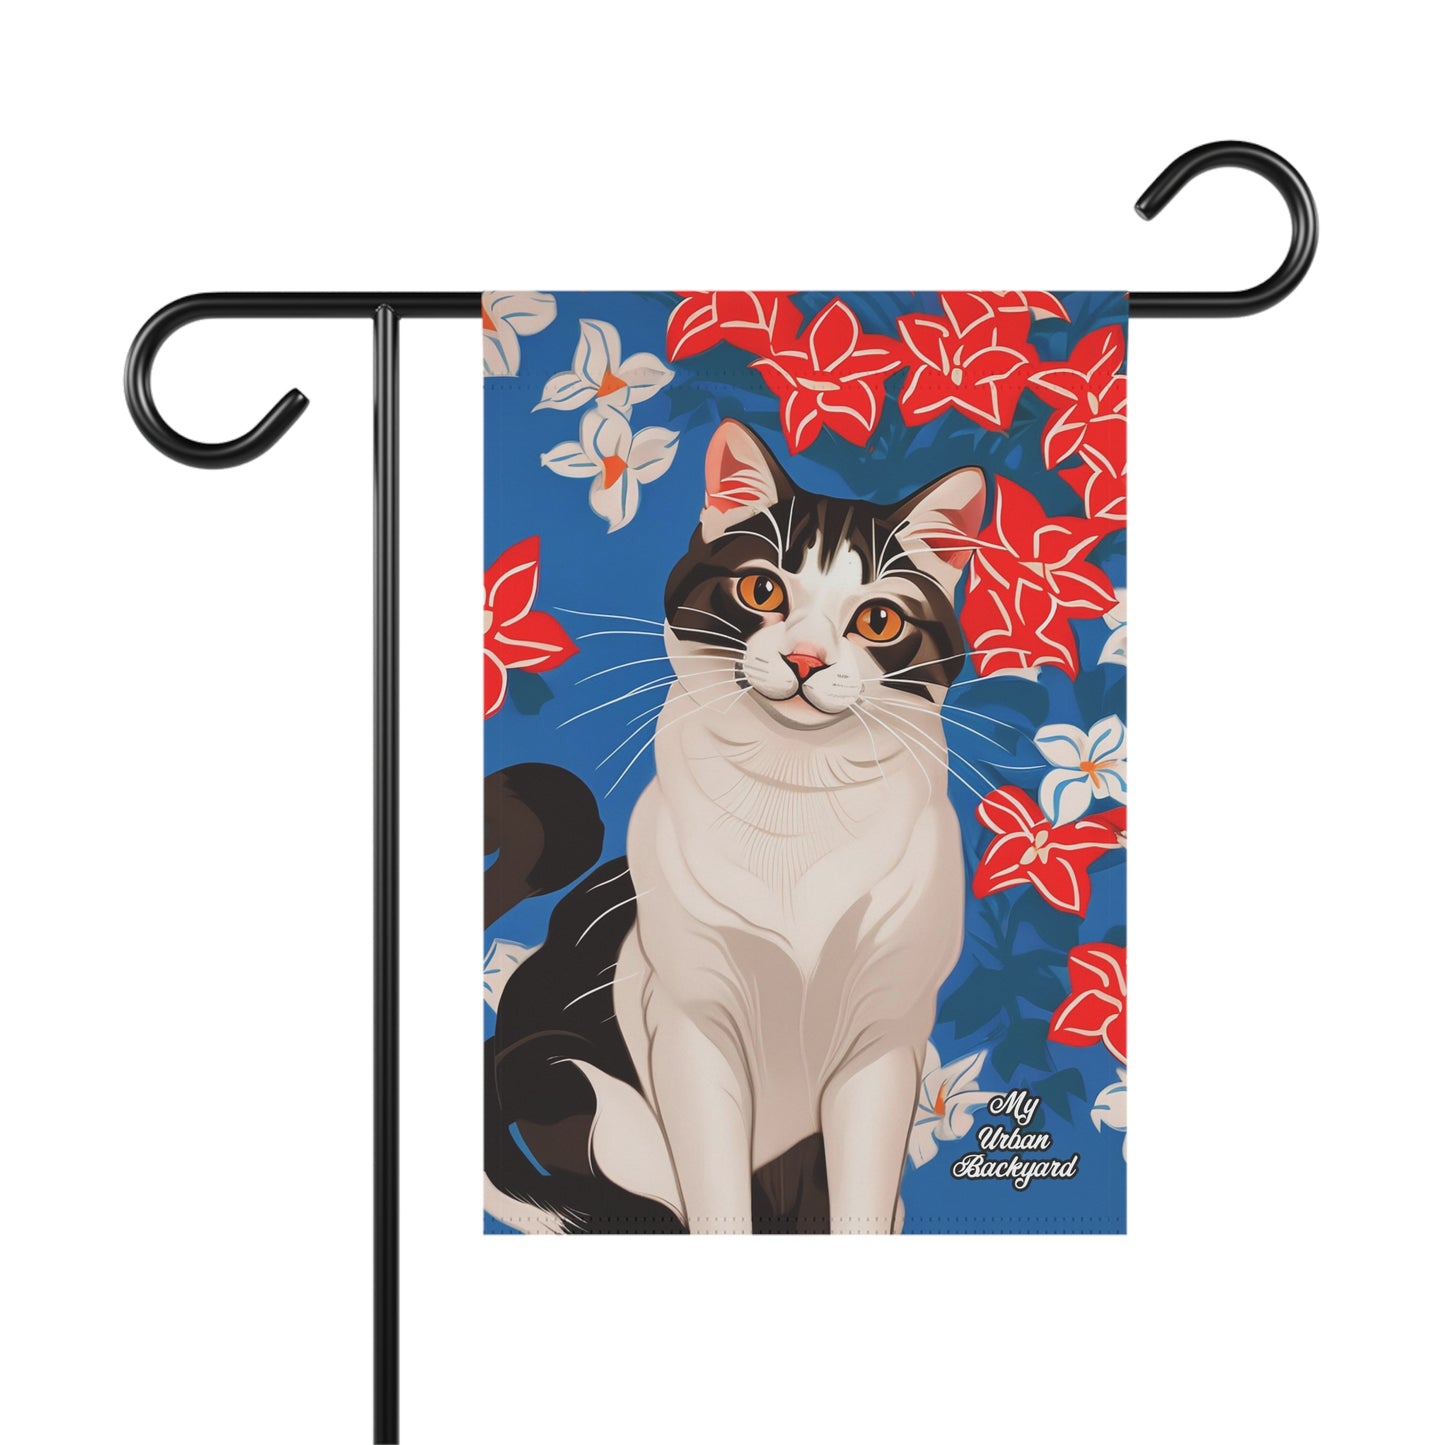 Cat with Red & White Flowers, Garden Flag for Yard, Patio, Porch, or Work, 12"x18" - Flag only